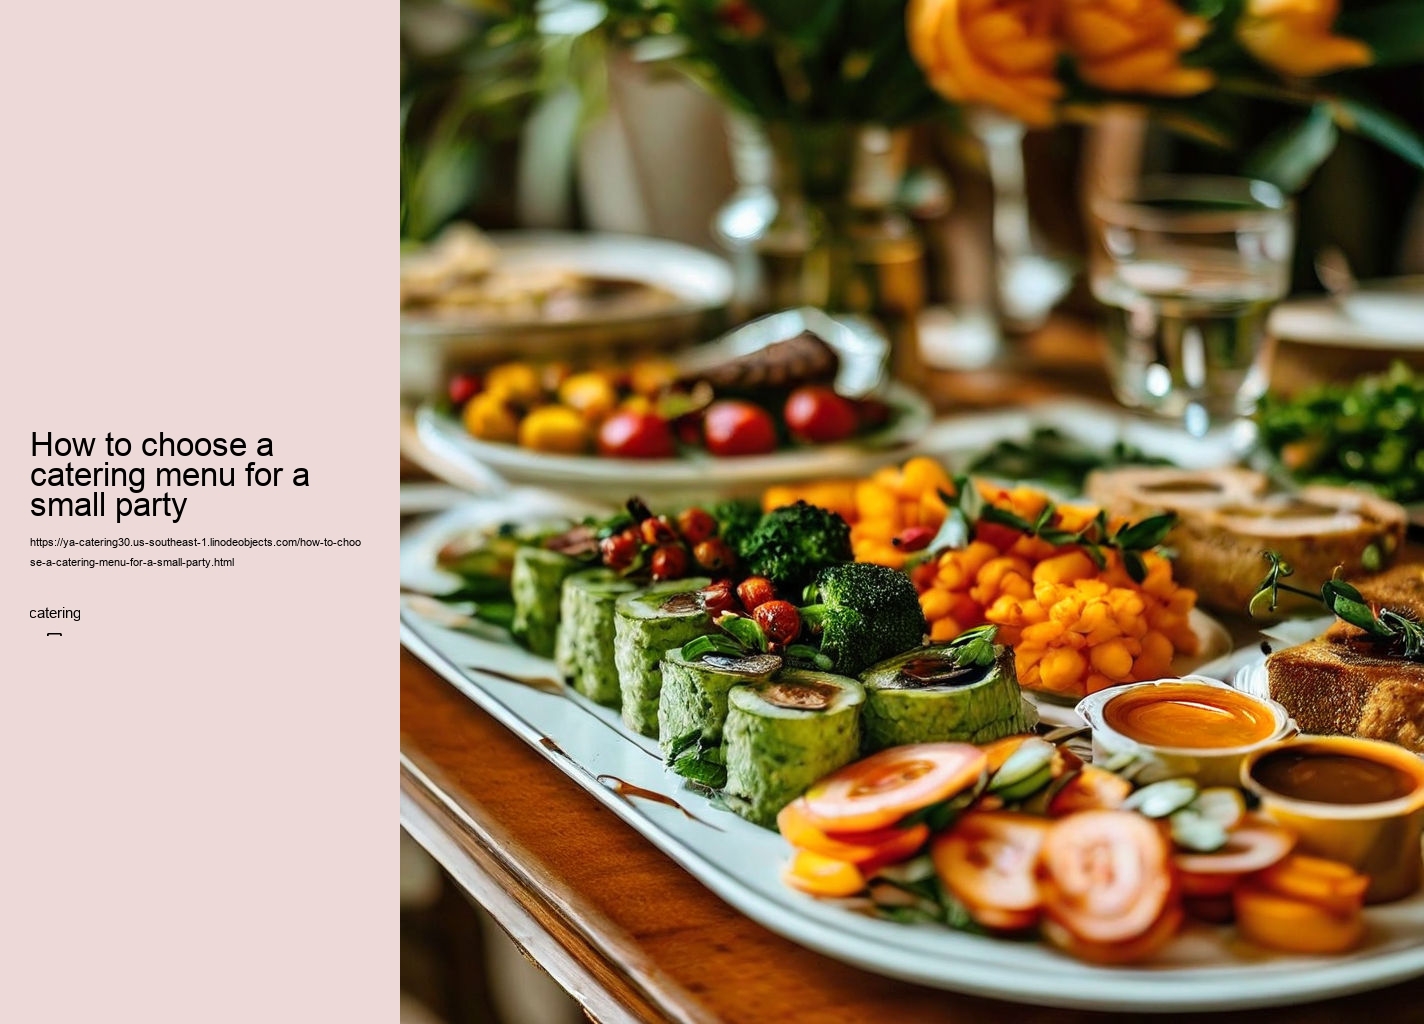 How to choose a catering menu for a small party